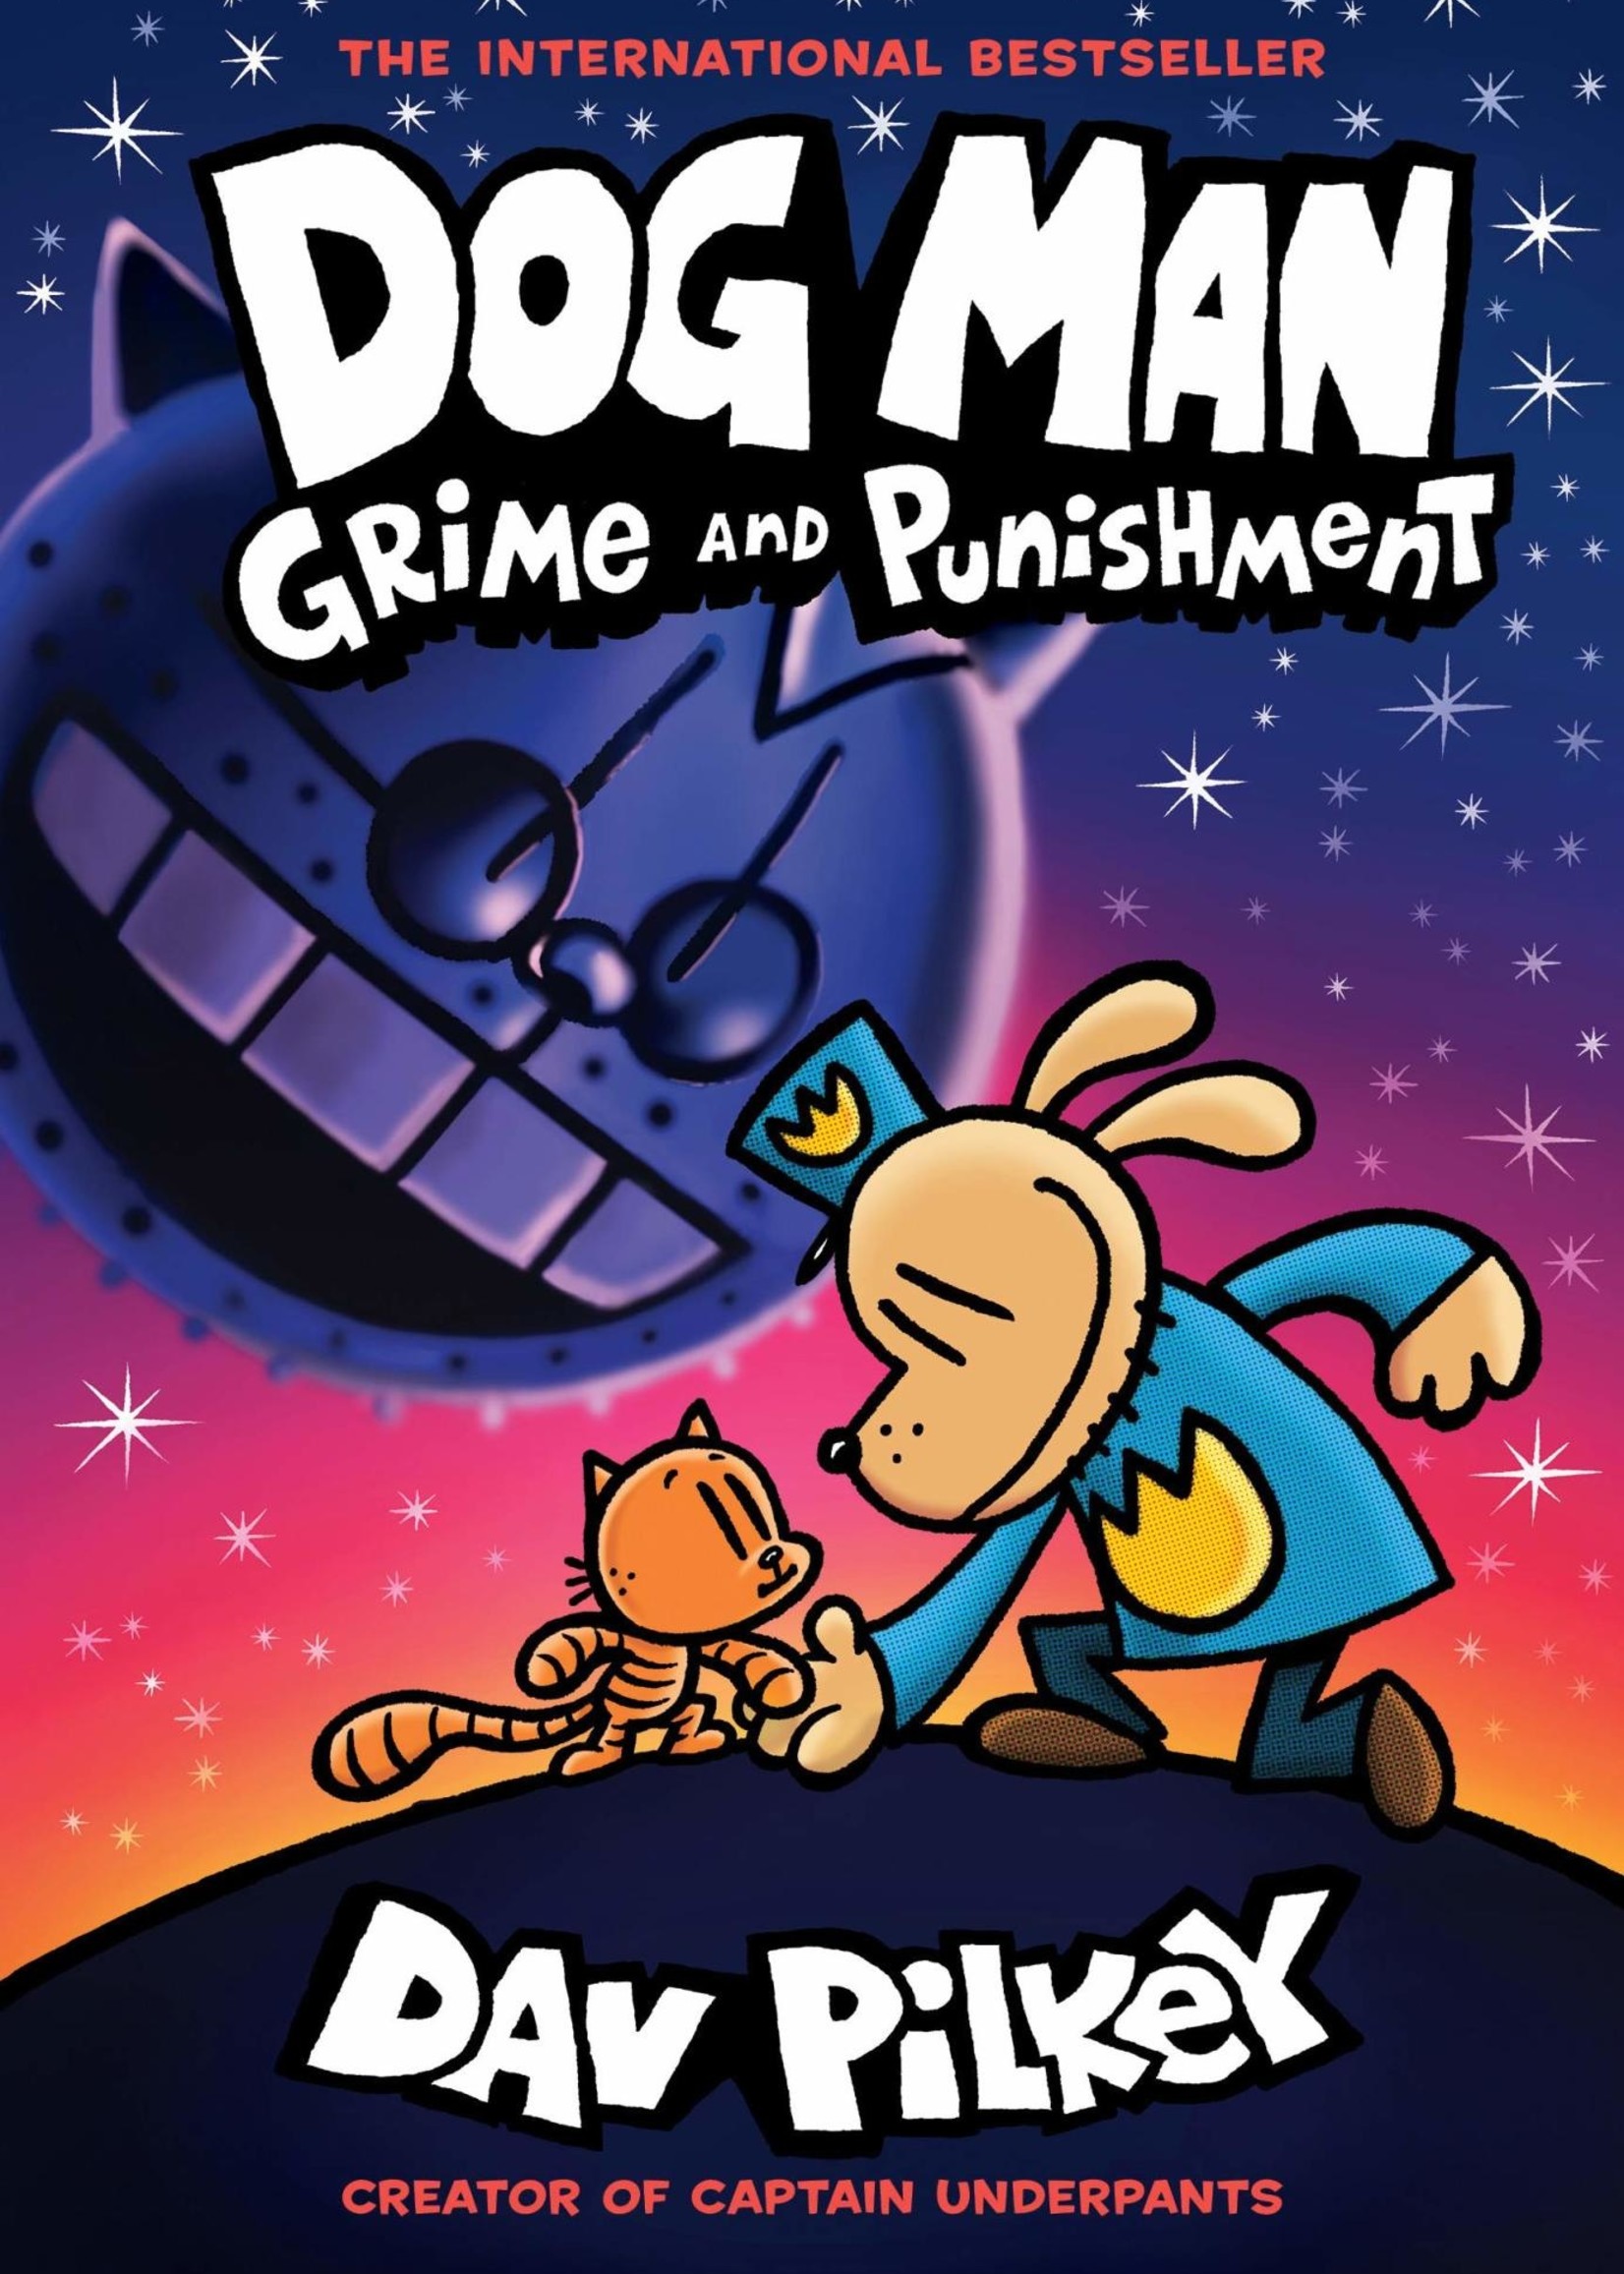 Grime and Punishment (Dog Man #9) by Dav Pilkey